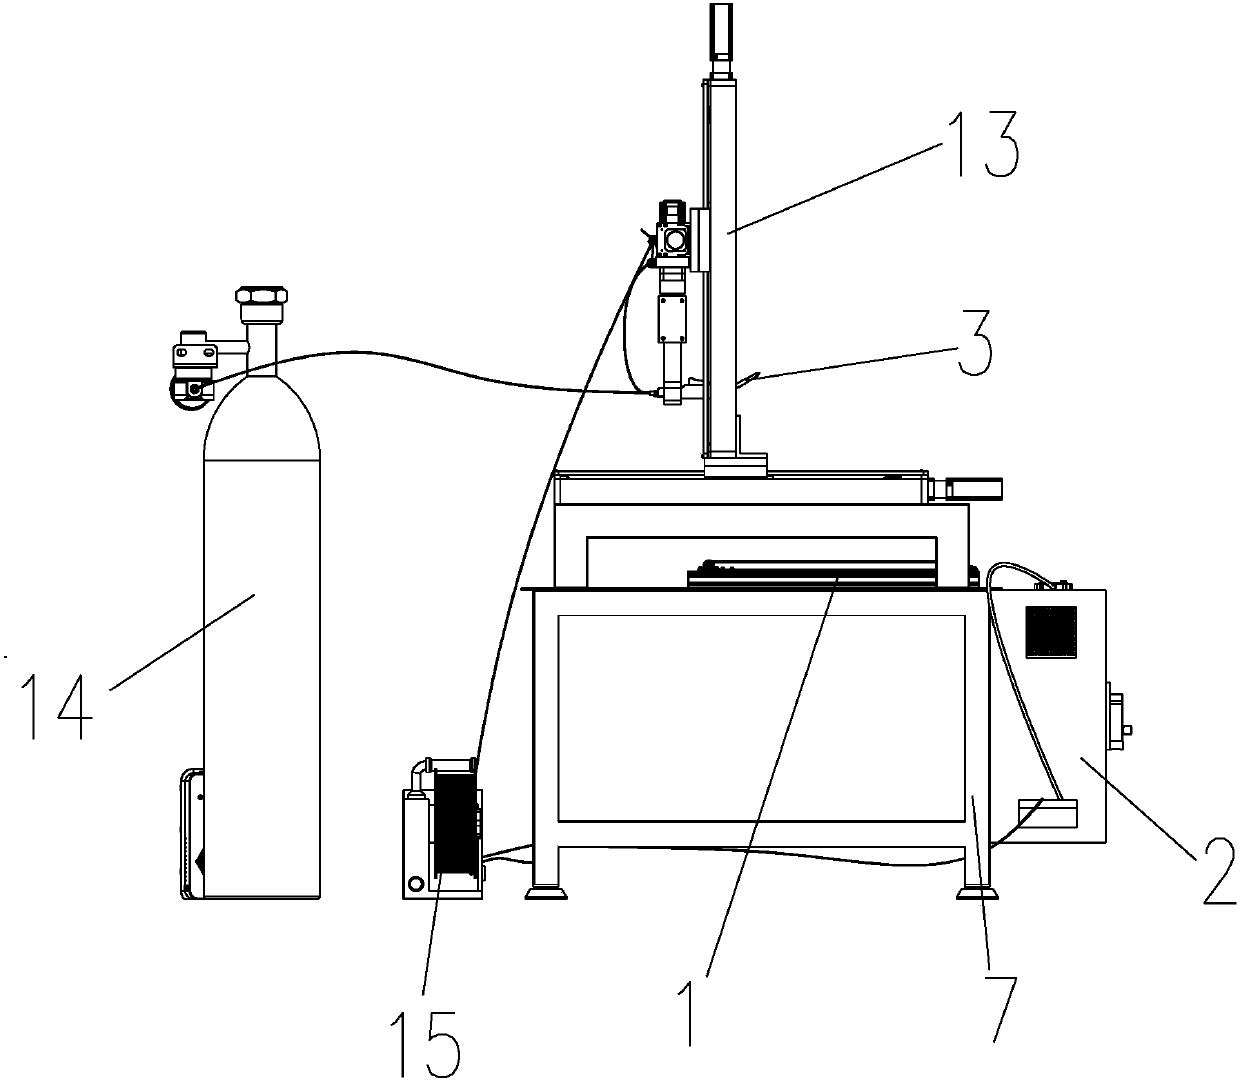 Automatic welding device